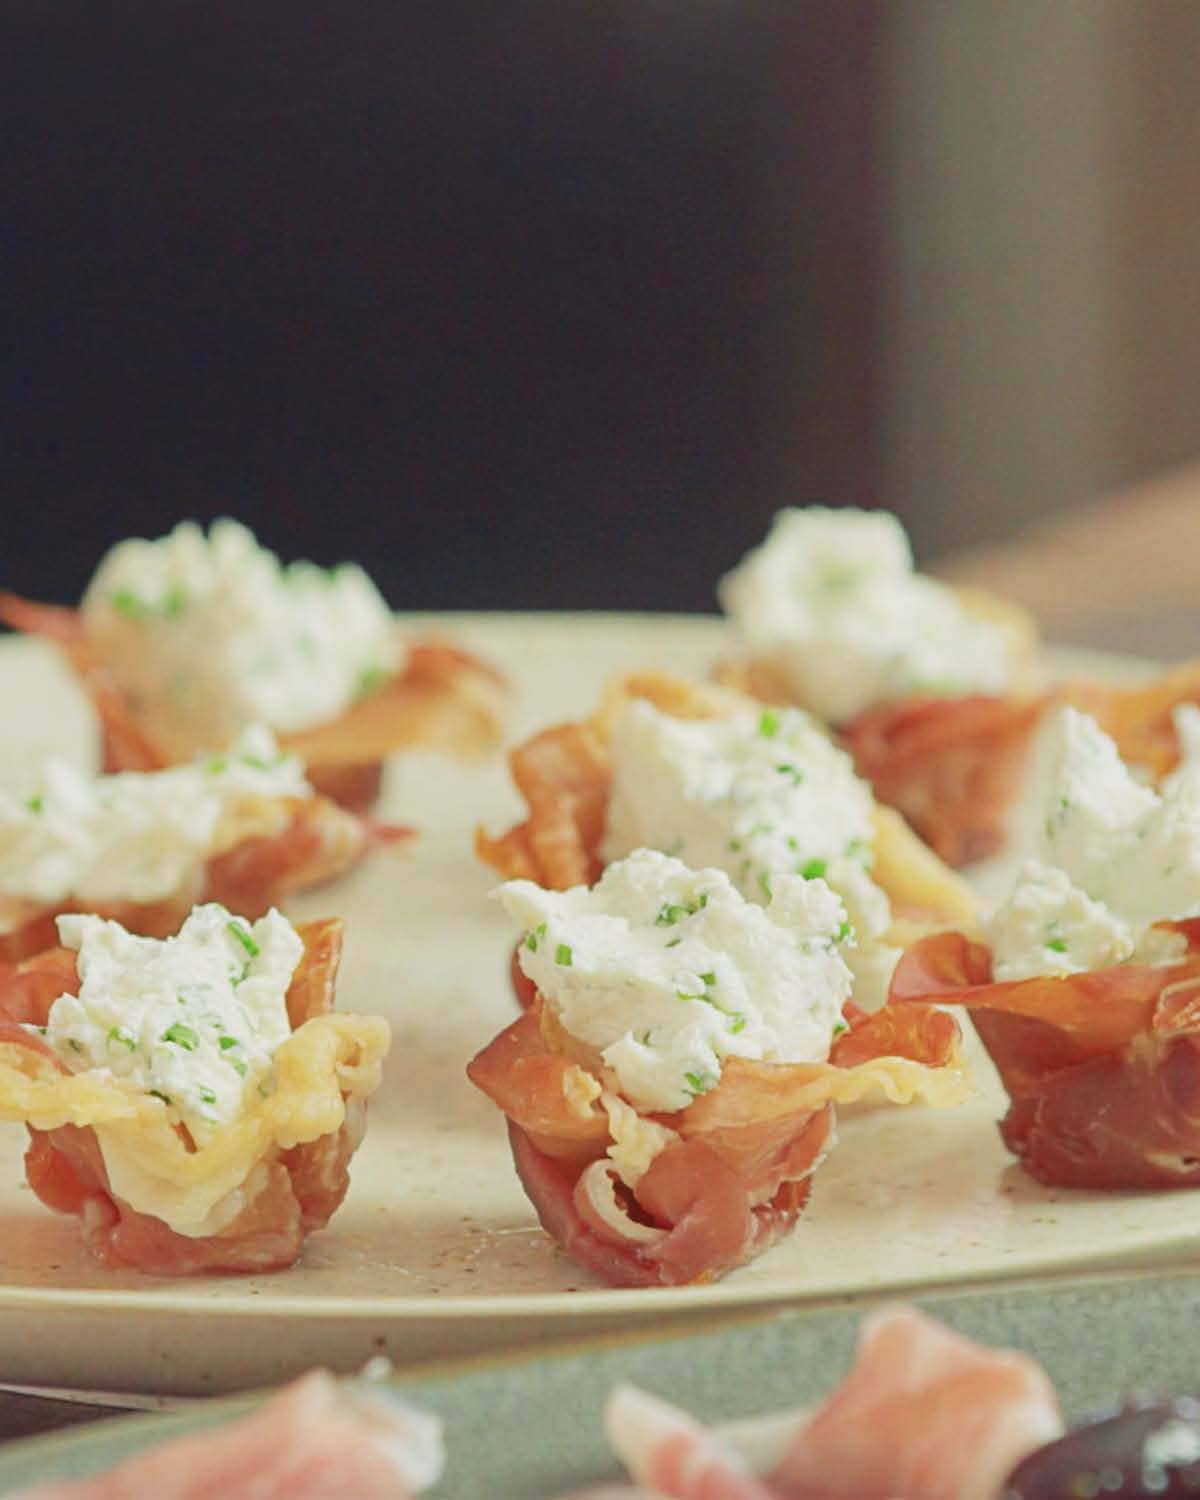 Prosciutto Di Parma Cups with Goat Cheese Mousse